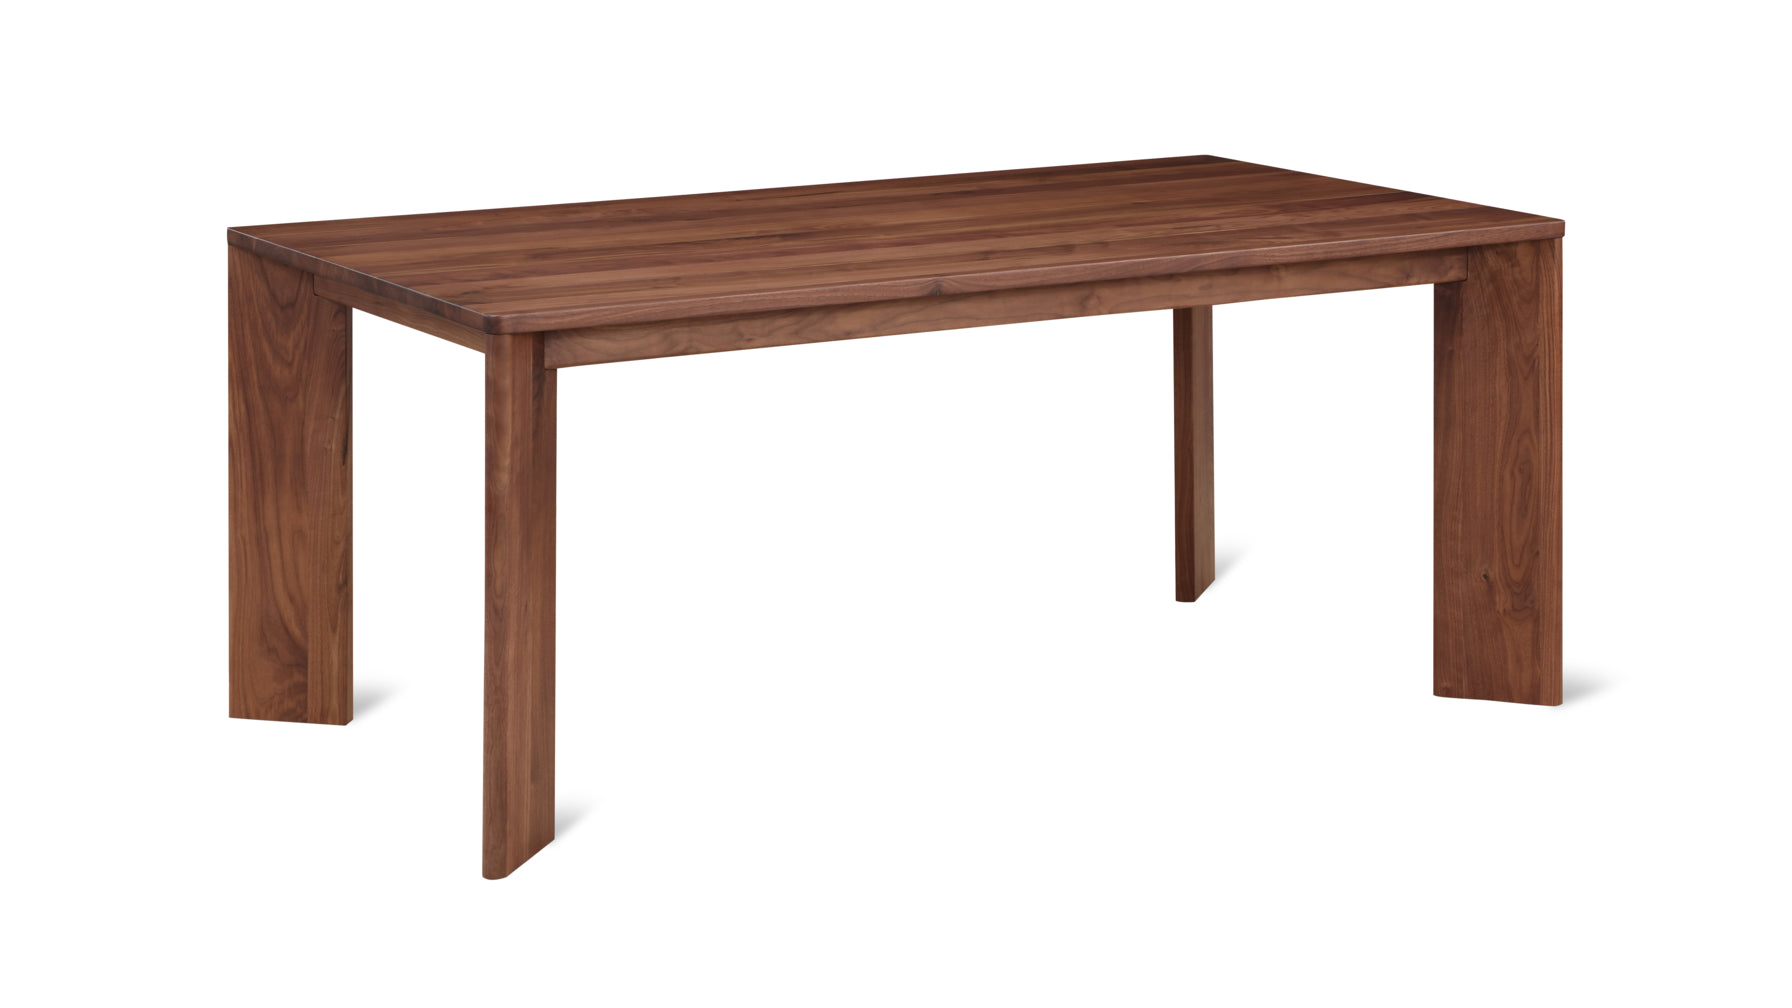 Frame Dining Table, Seats 4-6 People, Walnut - Image 1